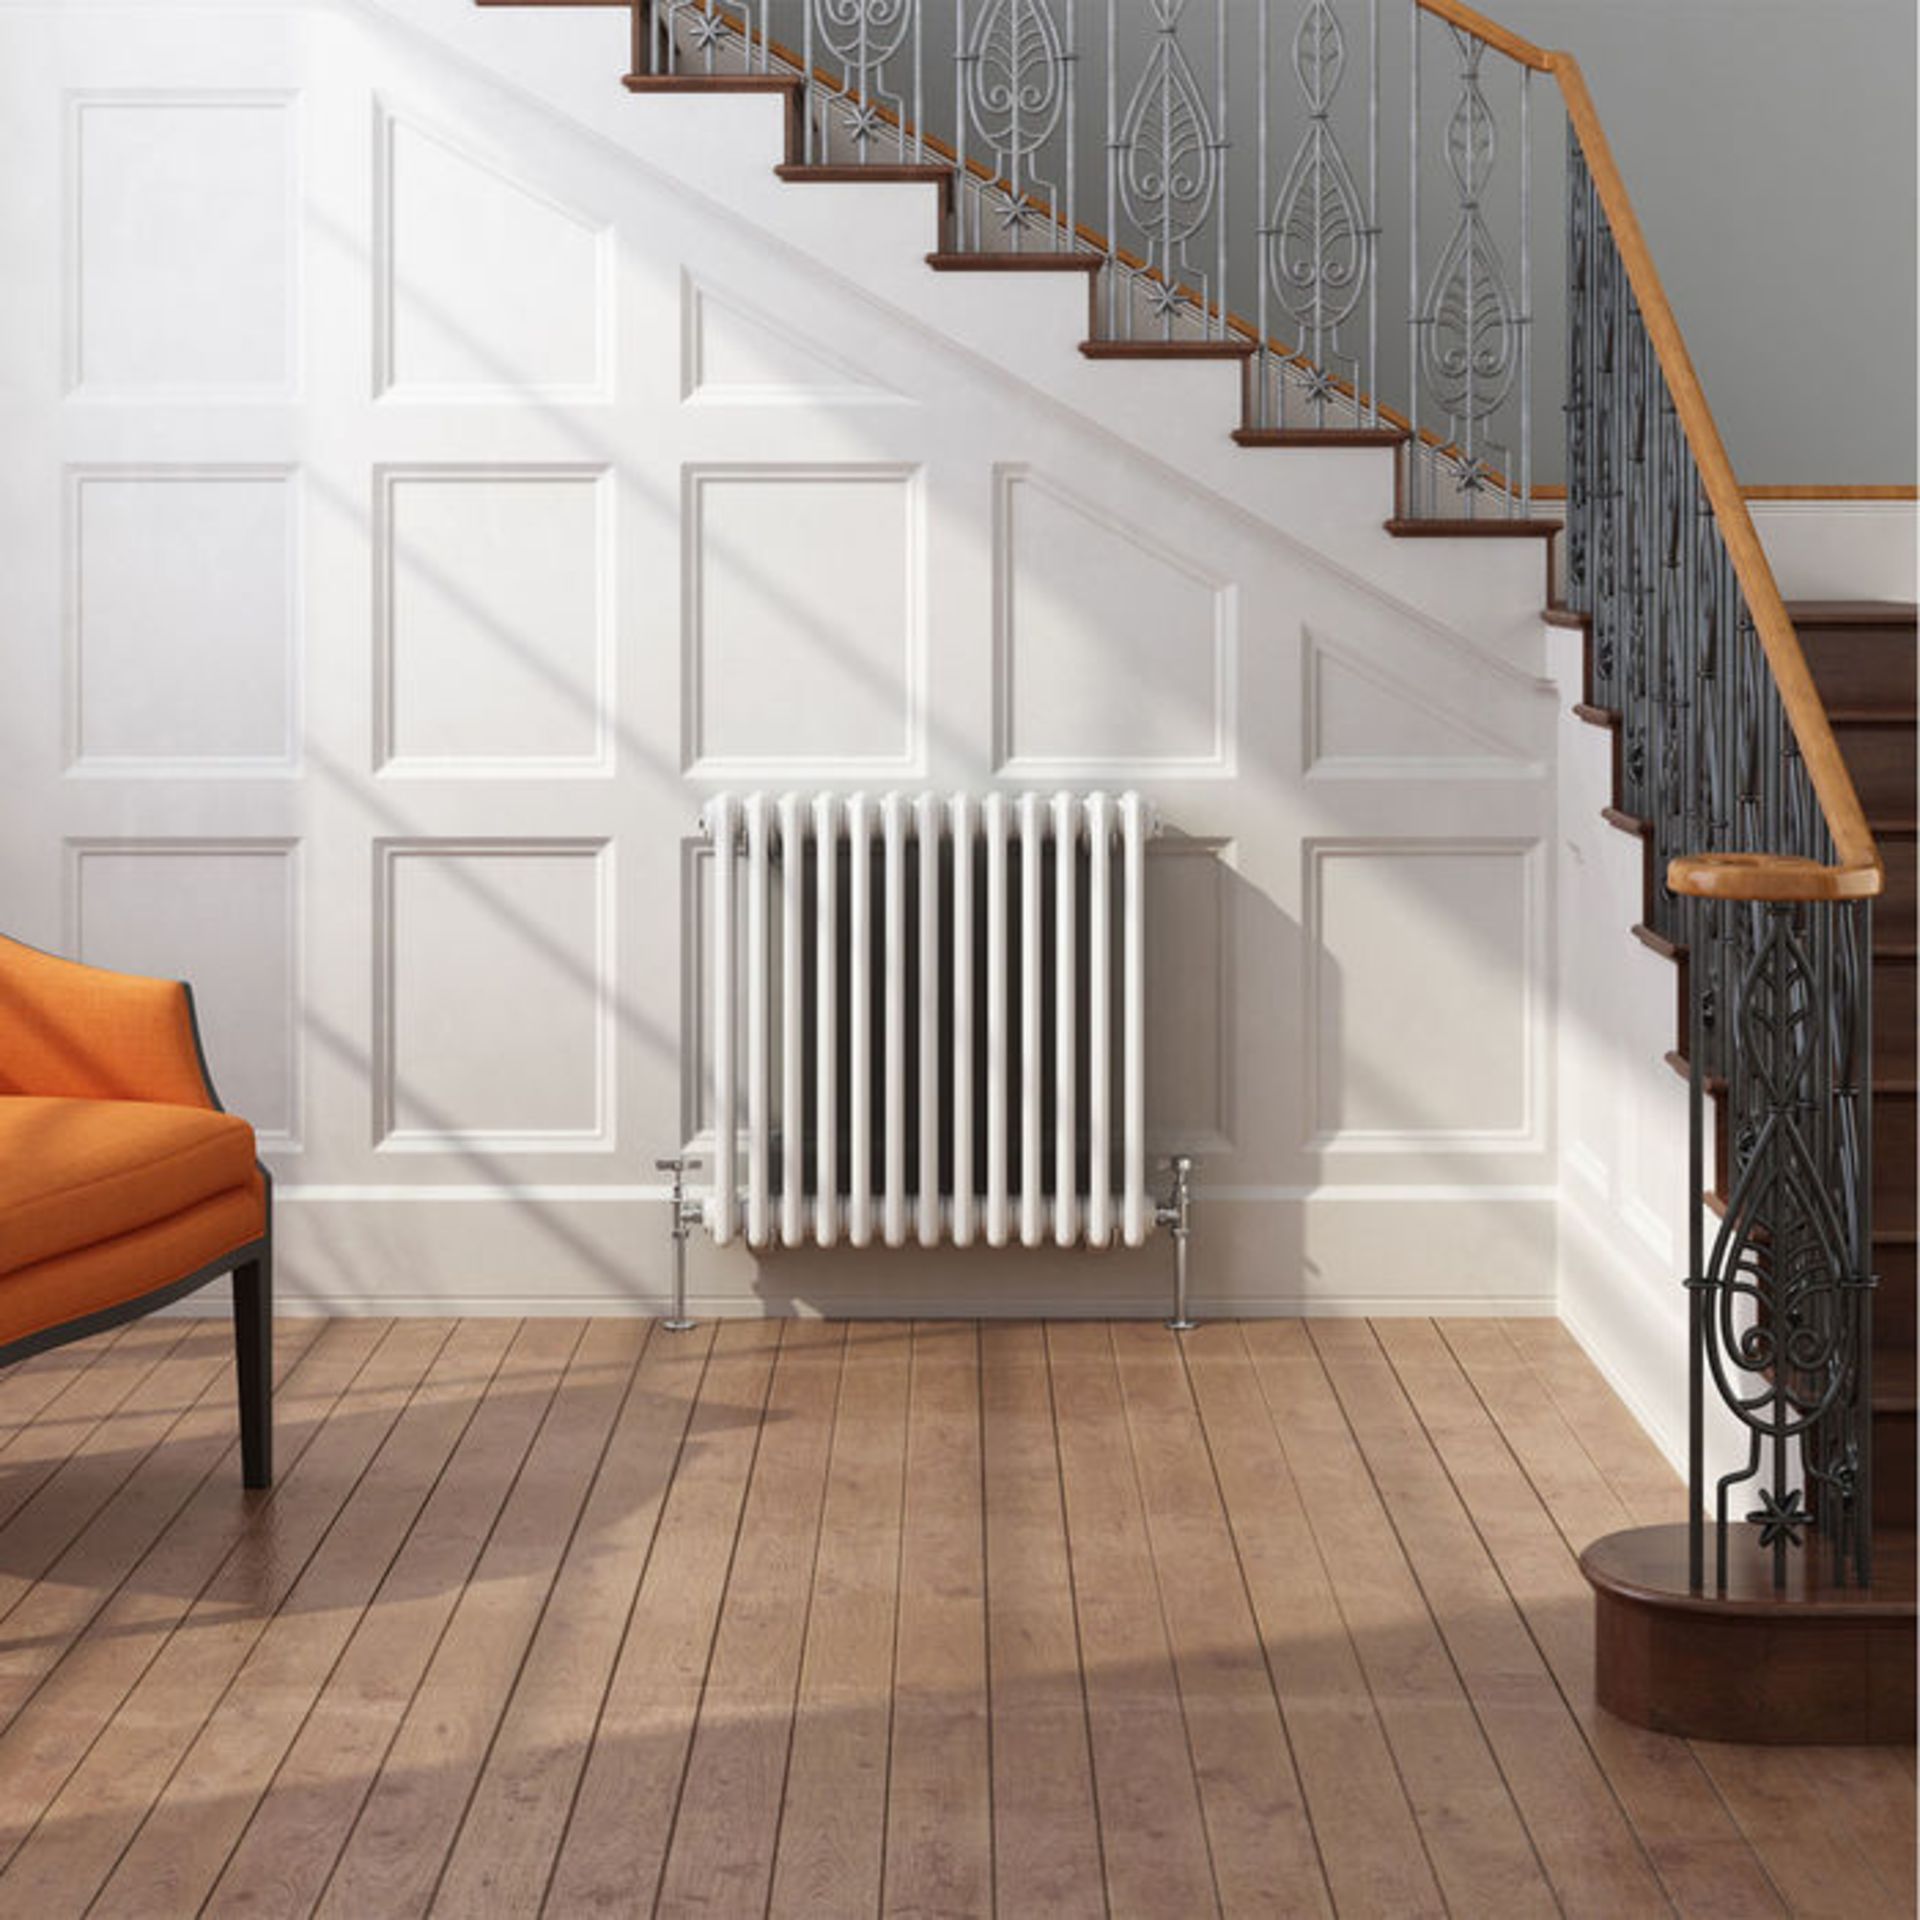 New & Boxed 600x820mm White Triple Panel Horizontal Colosseum Traditional Radiator. Rrp £499.9... - Image 2 of 2